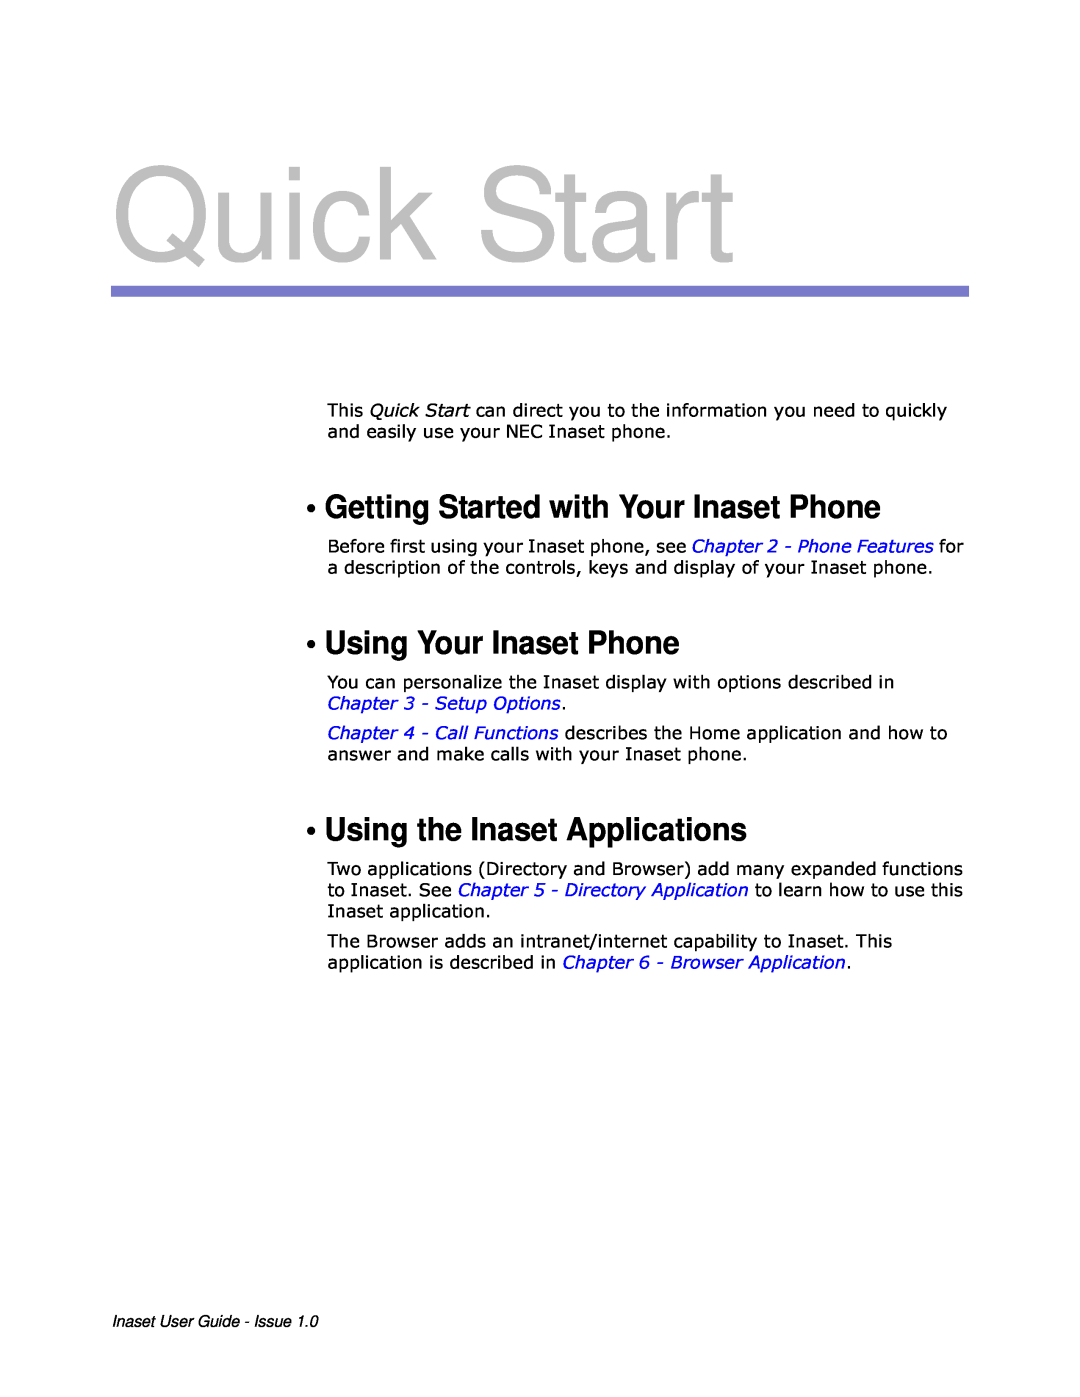 NEC NEAX 2000 IPS manual Qdvhwdssolfdwlrq, Quick Start, Getting Started with Your Inaset Phone, Using Your Inaset Phone 